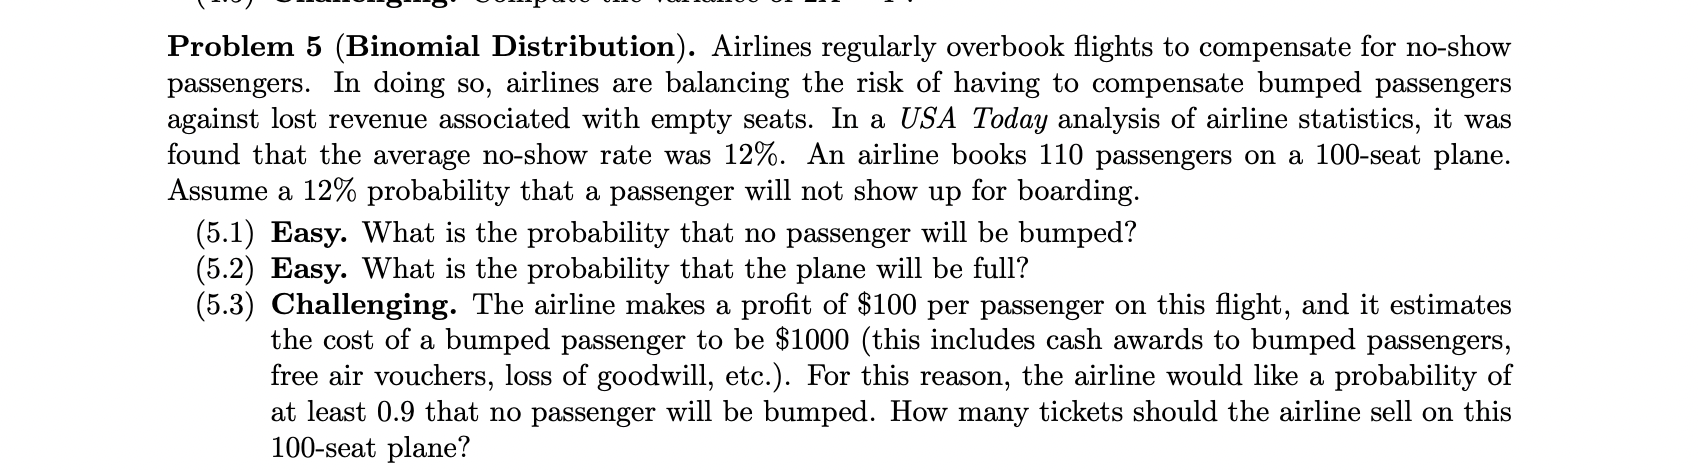 Problem 5 Binomial Distribution Airlines Regularly Overbook Flights To Compensate For No Show Passengers In Doing So 1